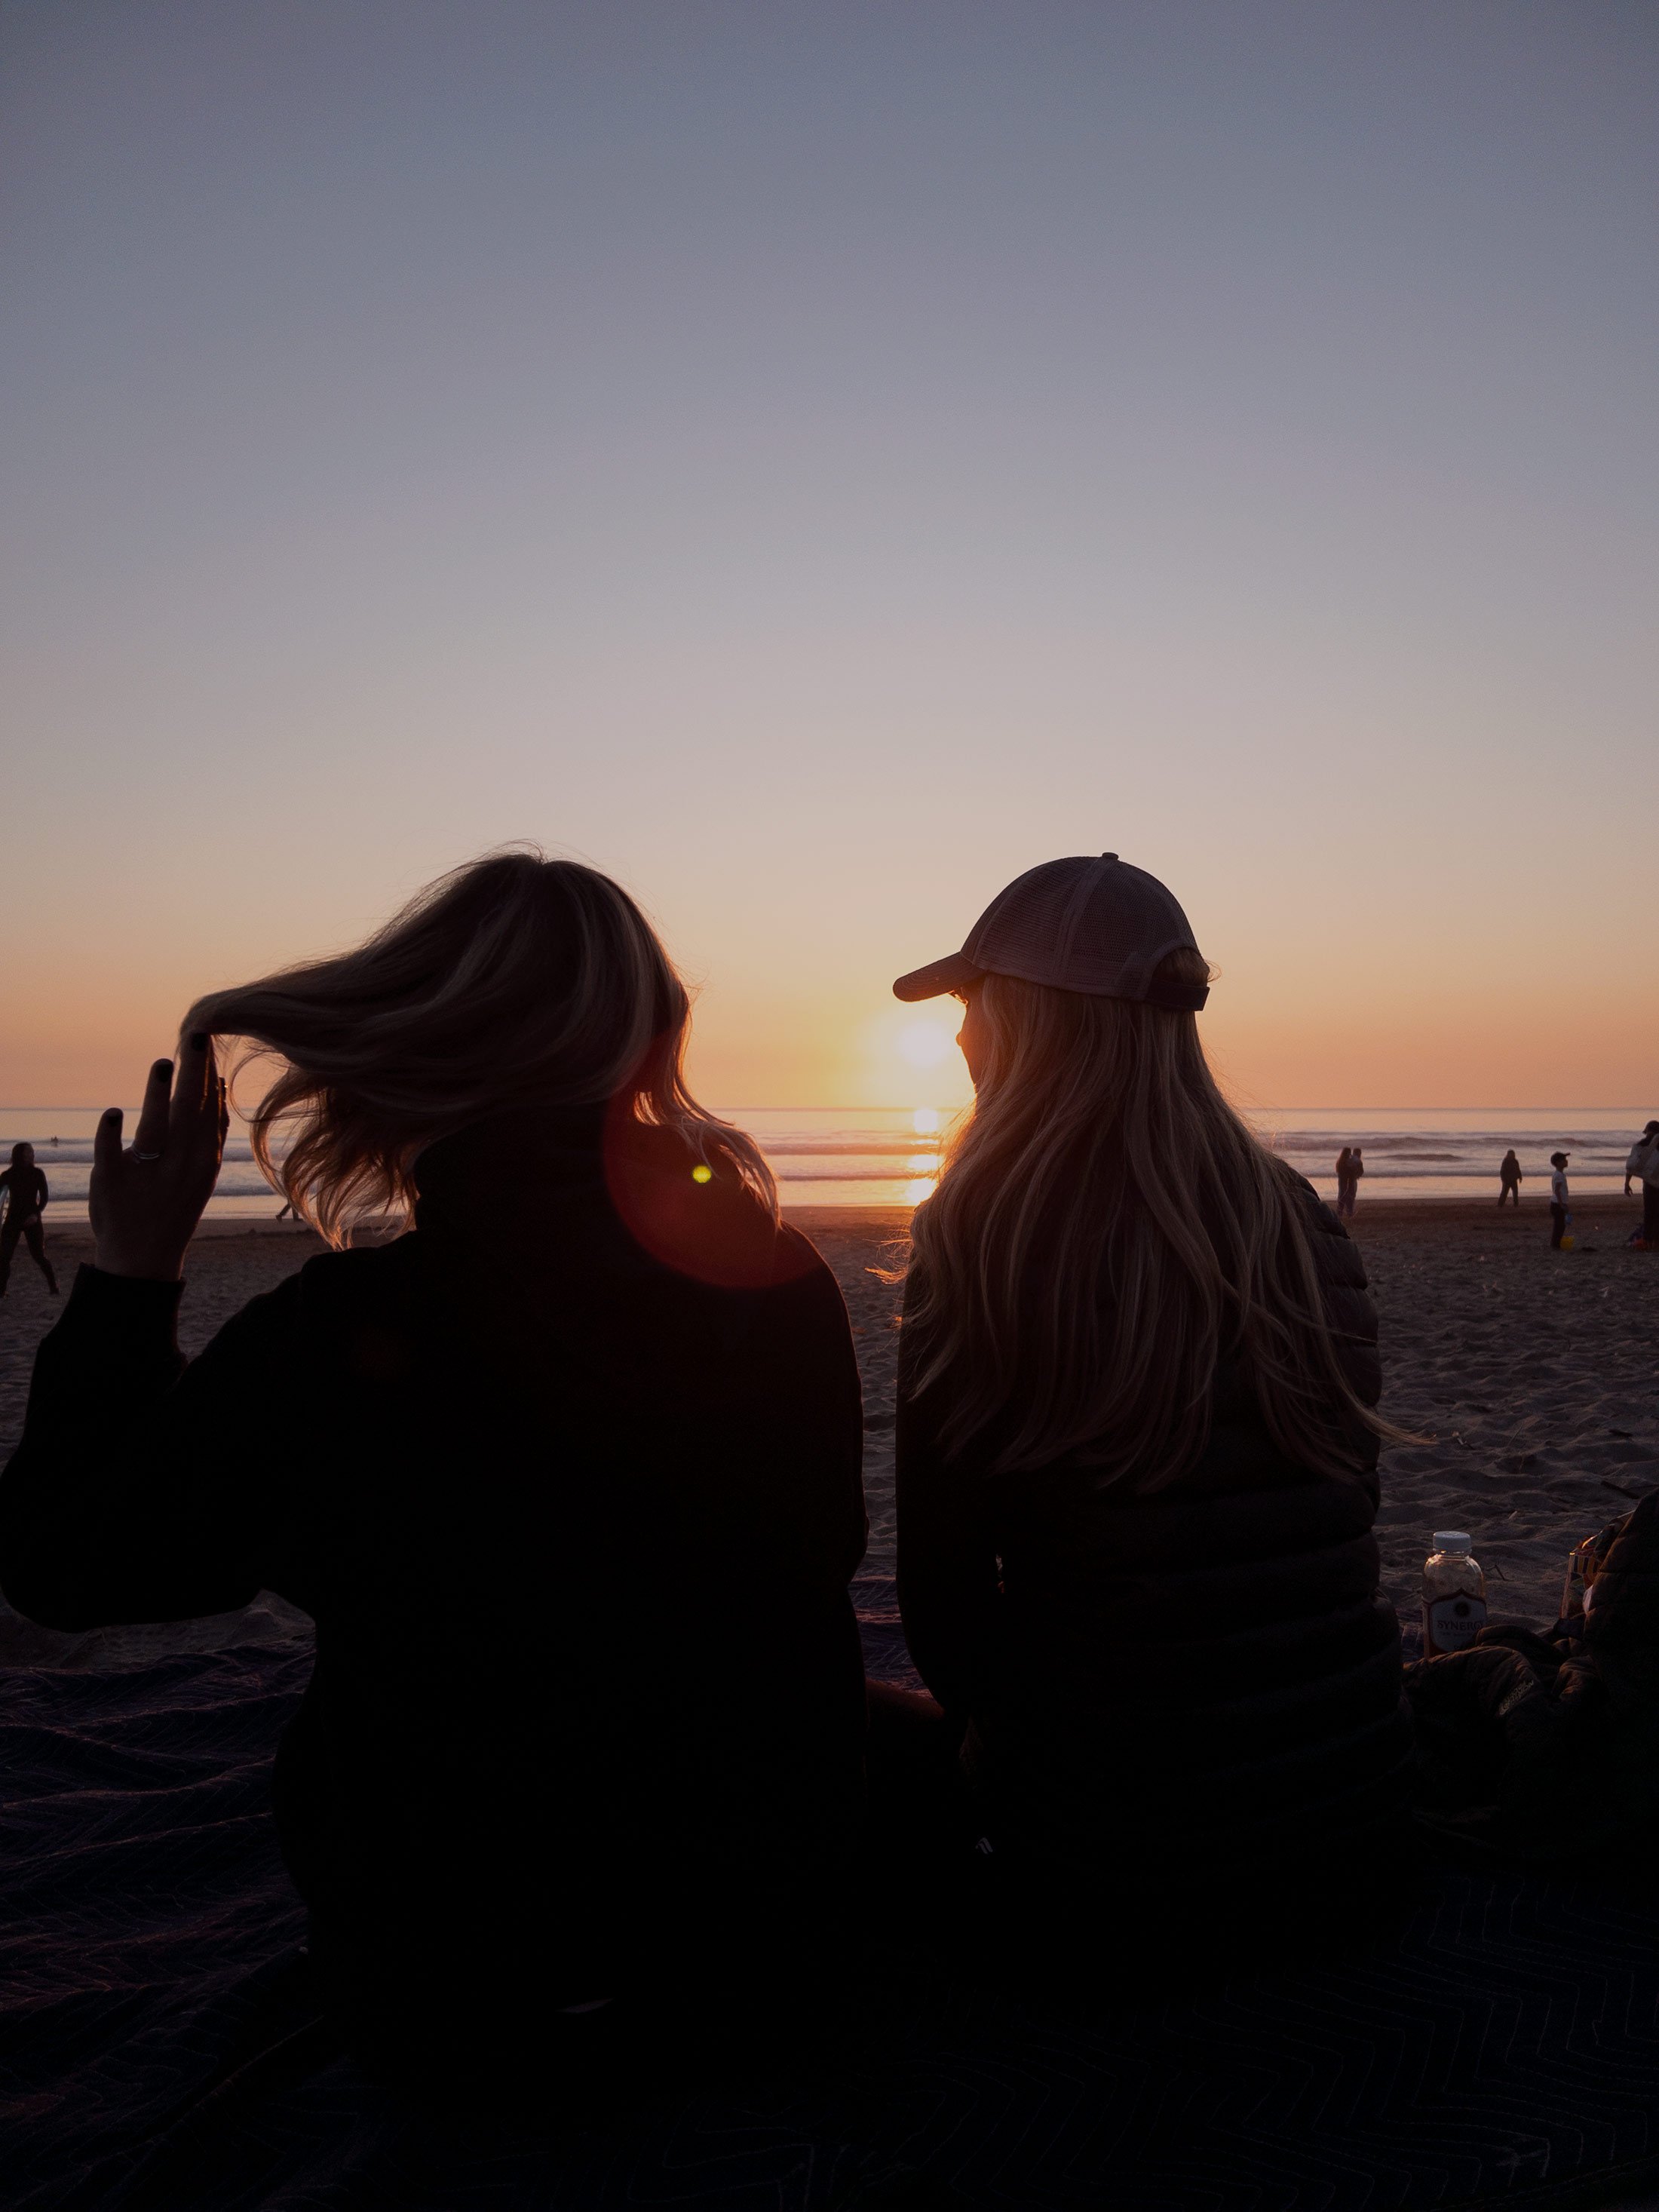 SF diaries, #03/2022 – Very Californian! Going to Napa Valley, watching football, and sunsets at the beach